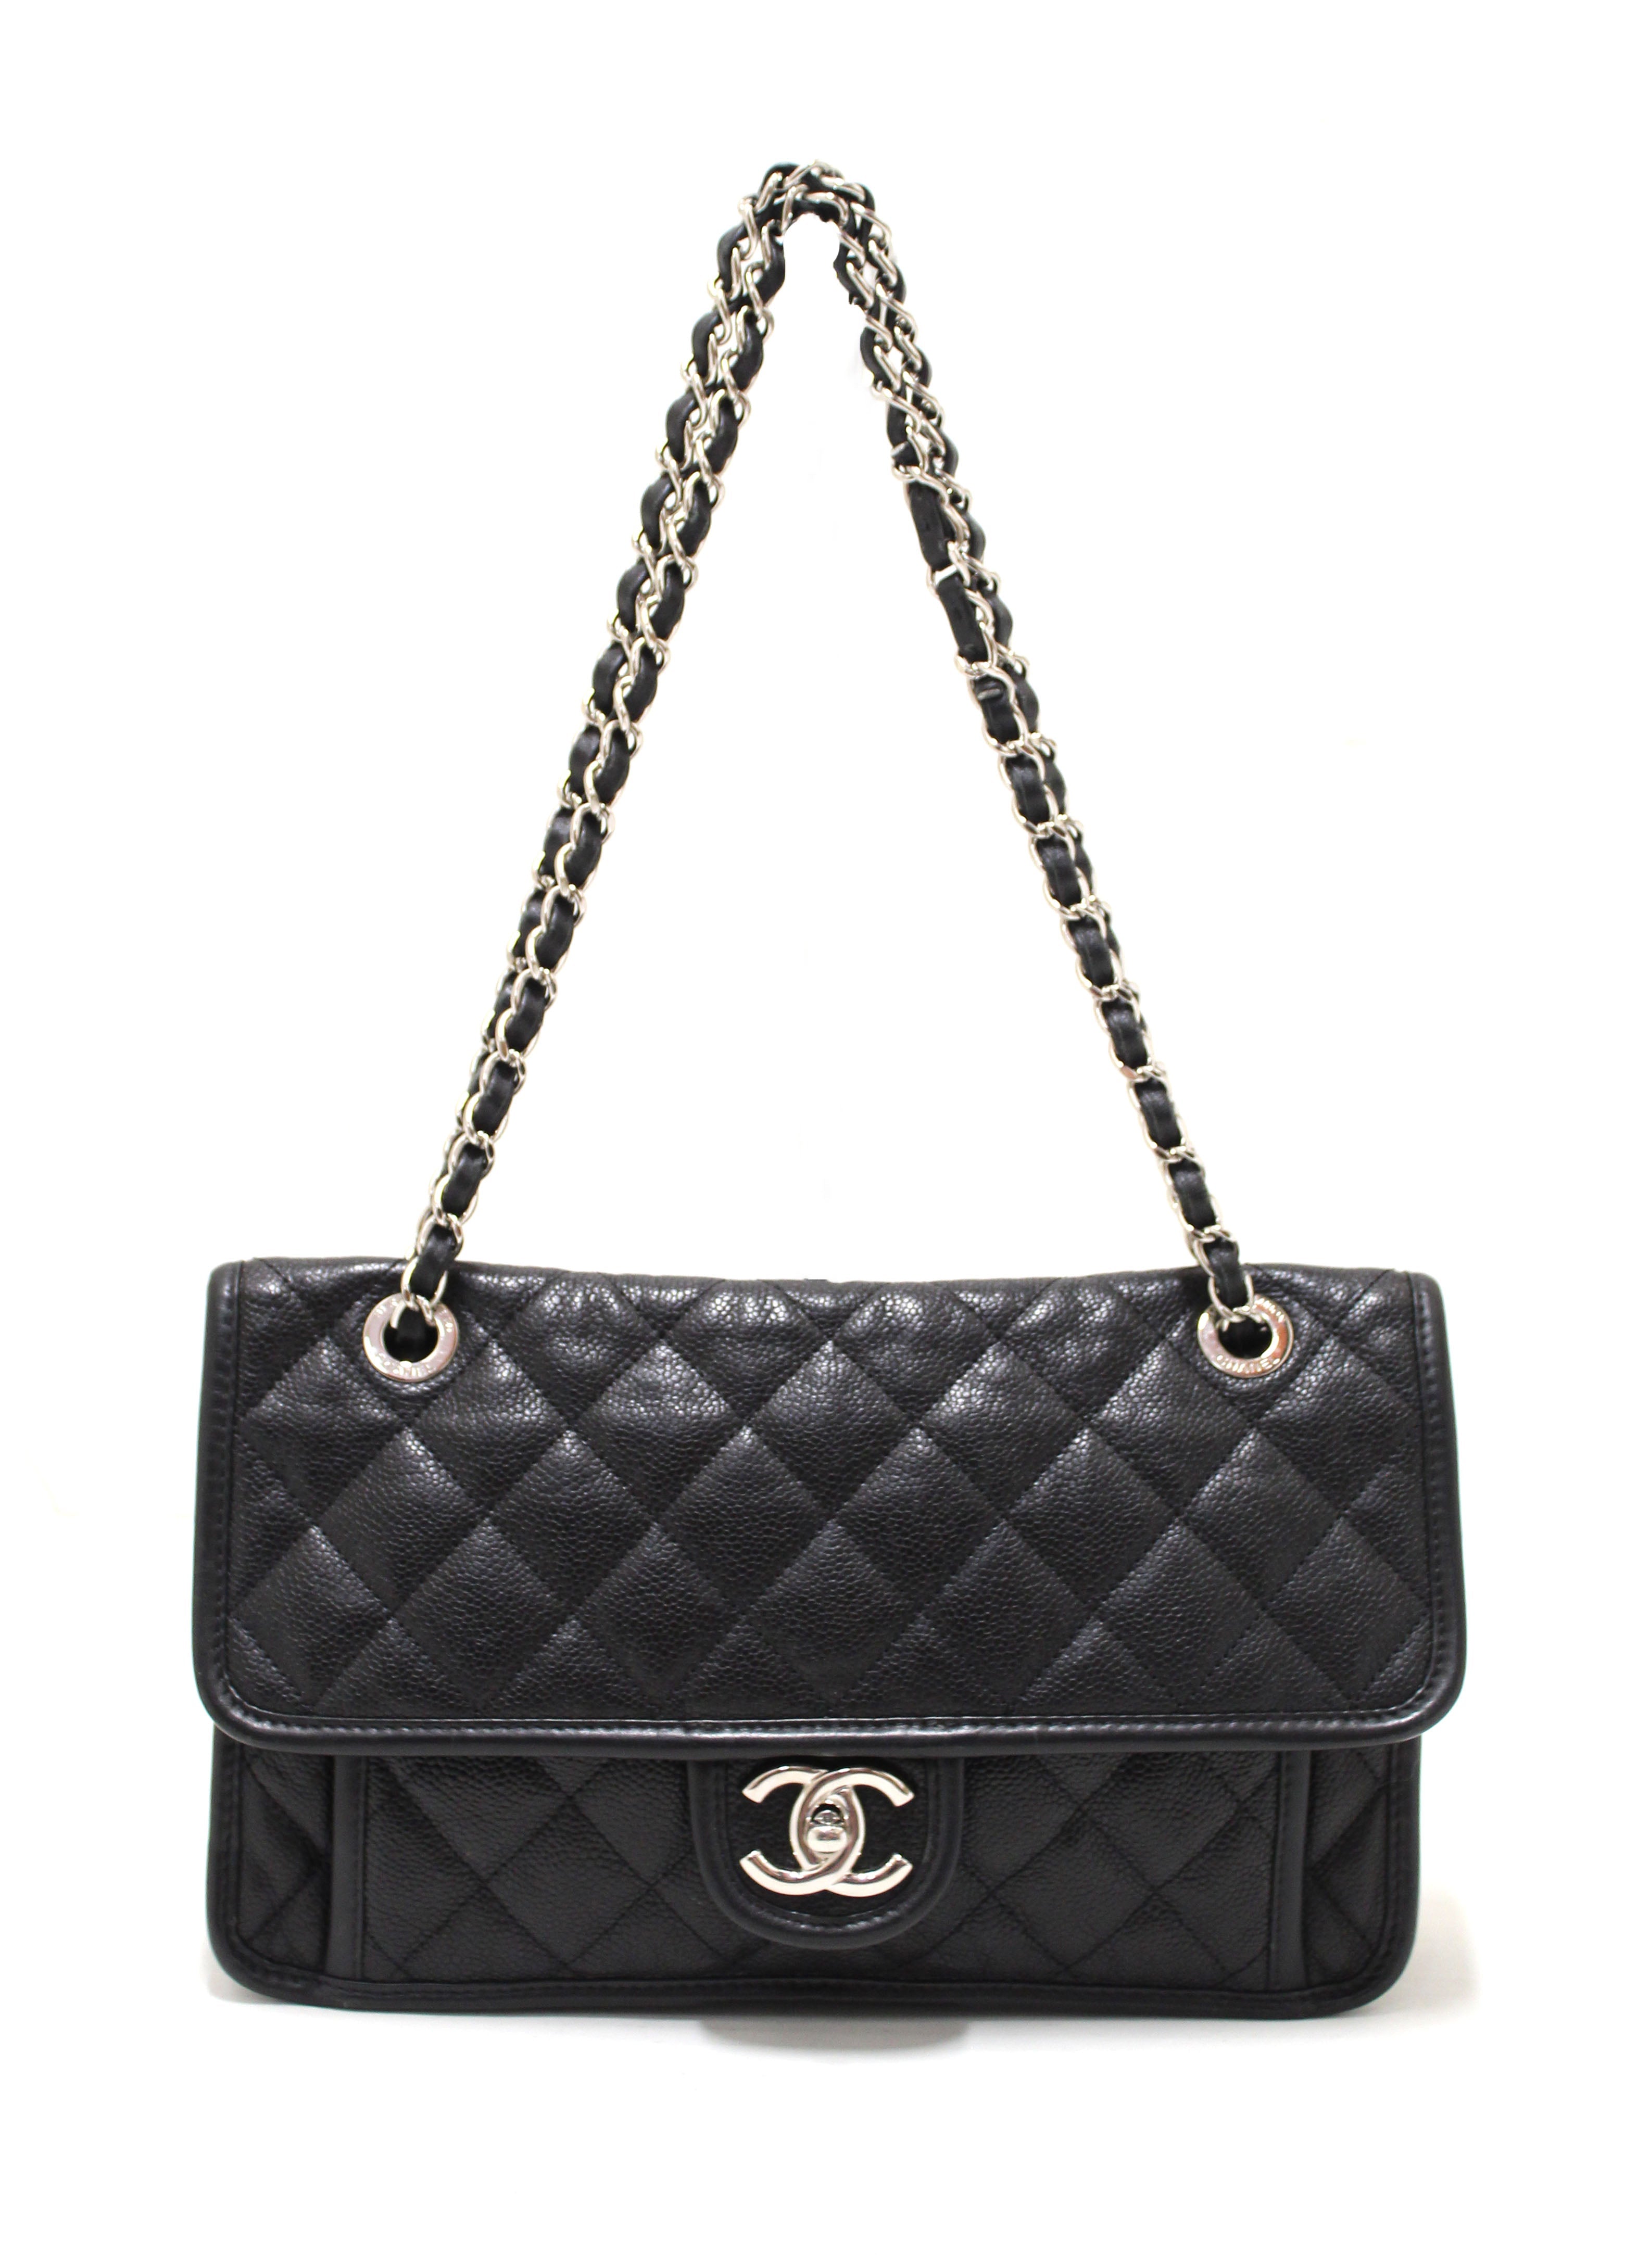 Authentic Chanel Black Quilted Caviar Leather Riviera Flap